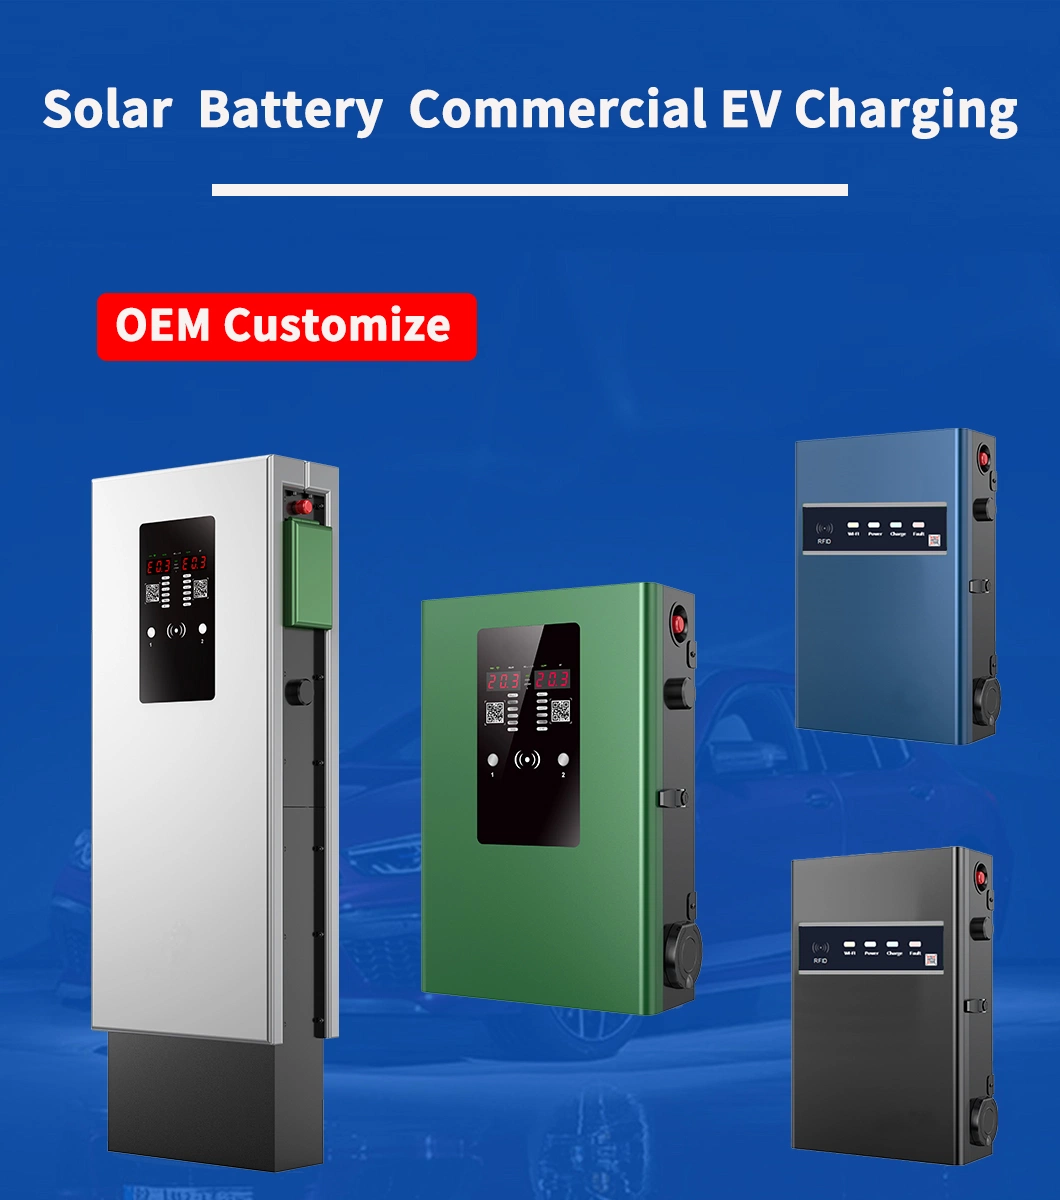 Hot Selling Solar Power Car Battery Charger 43kw 63A Solar Electric Vehicle Charging Station for Commercial Europe Car Charger Photovoltaic Systems